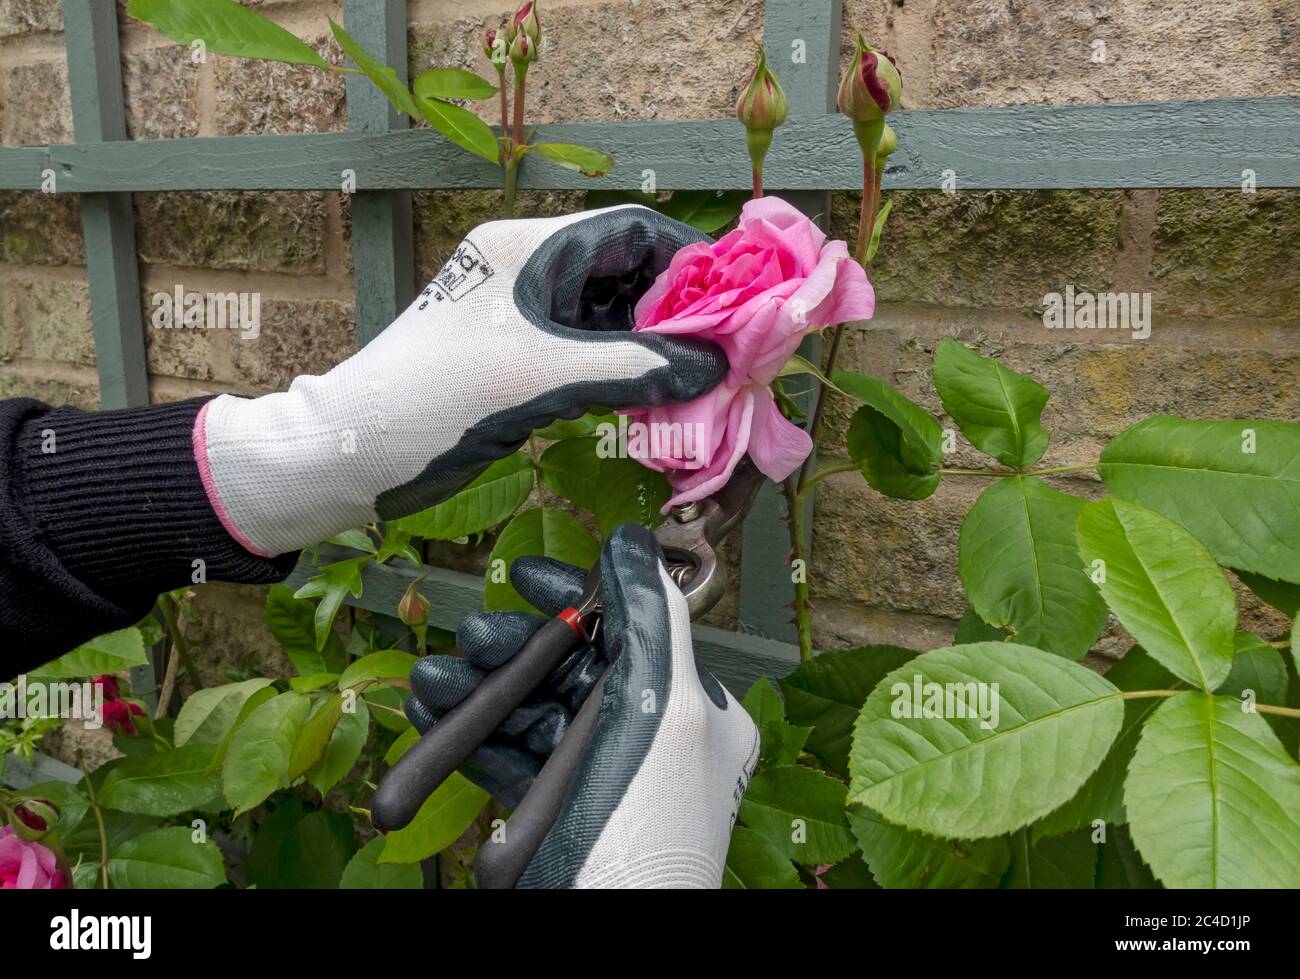 Close up of person gardener pruning deadheading pink rose ‘Gertrude Jekyll’ flowers flower with using secateurs in summer England UK United Kingdom GB Stock Photo